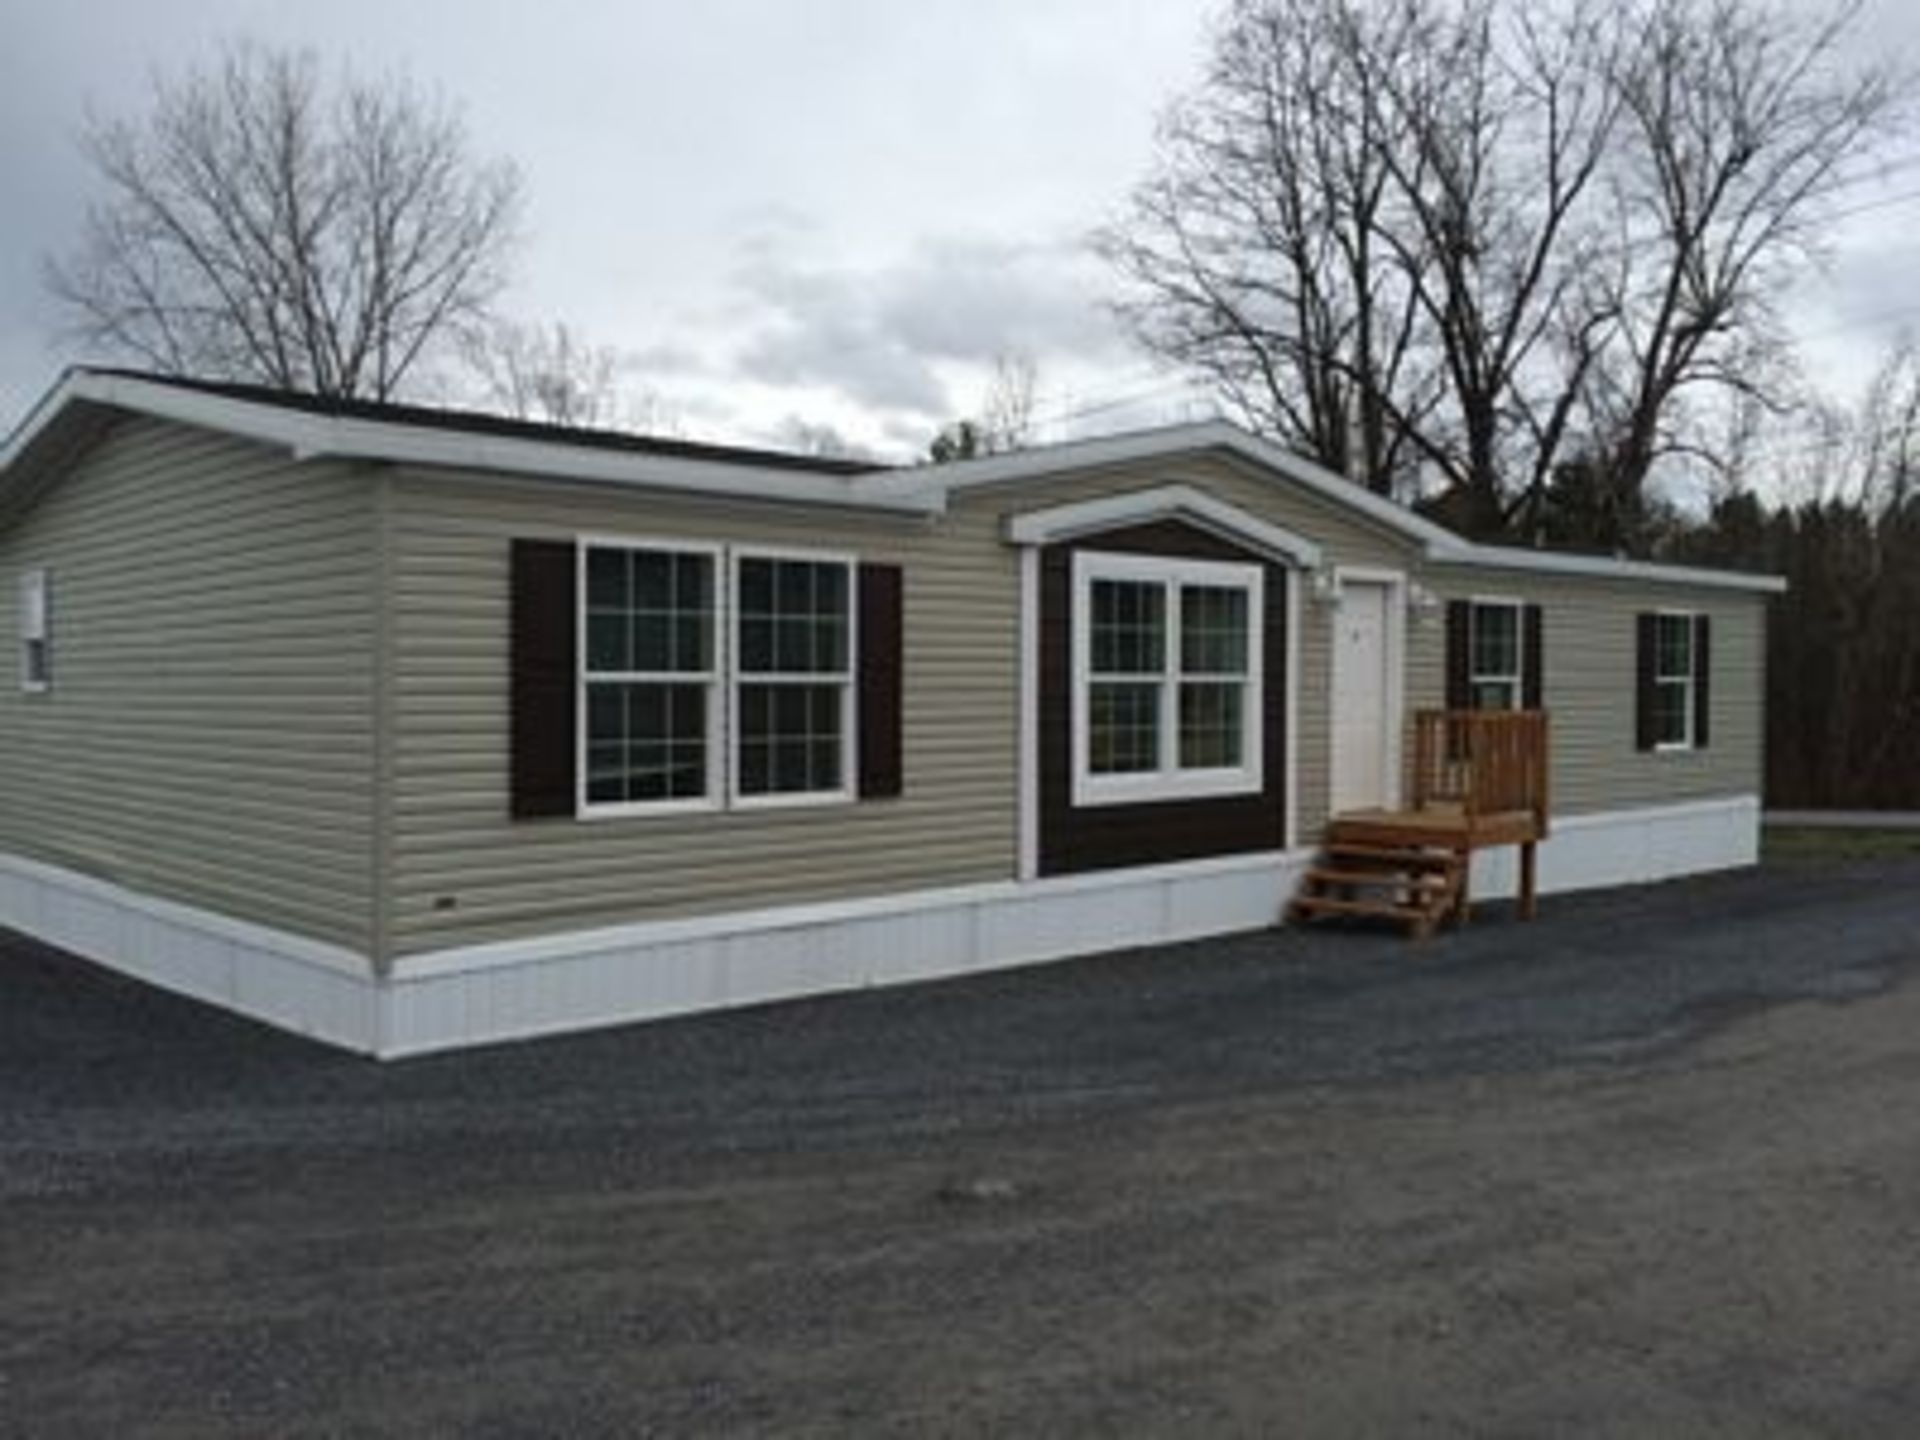 2013 MARLETTE DOUBLE WIDE MOBILE HOME, 28'X56', MODEL "THE LINCOLN", MODEL SERIES: HOMESTEAD,